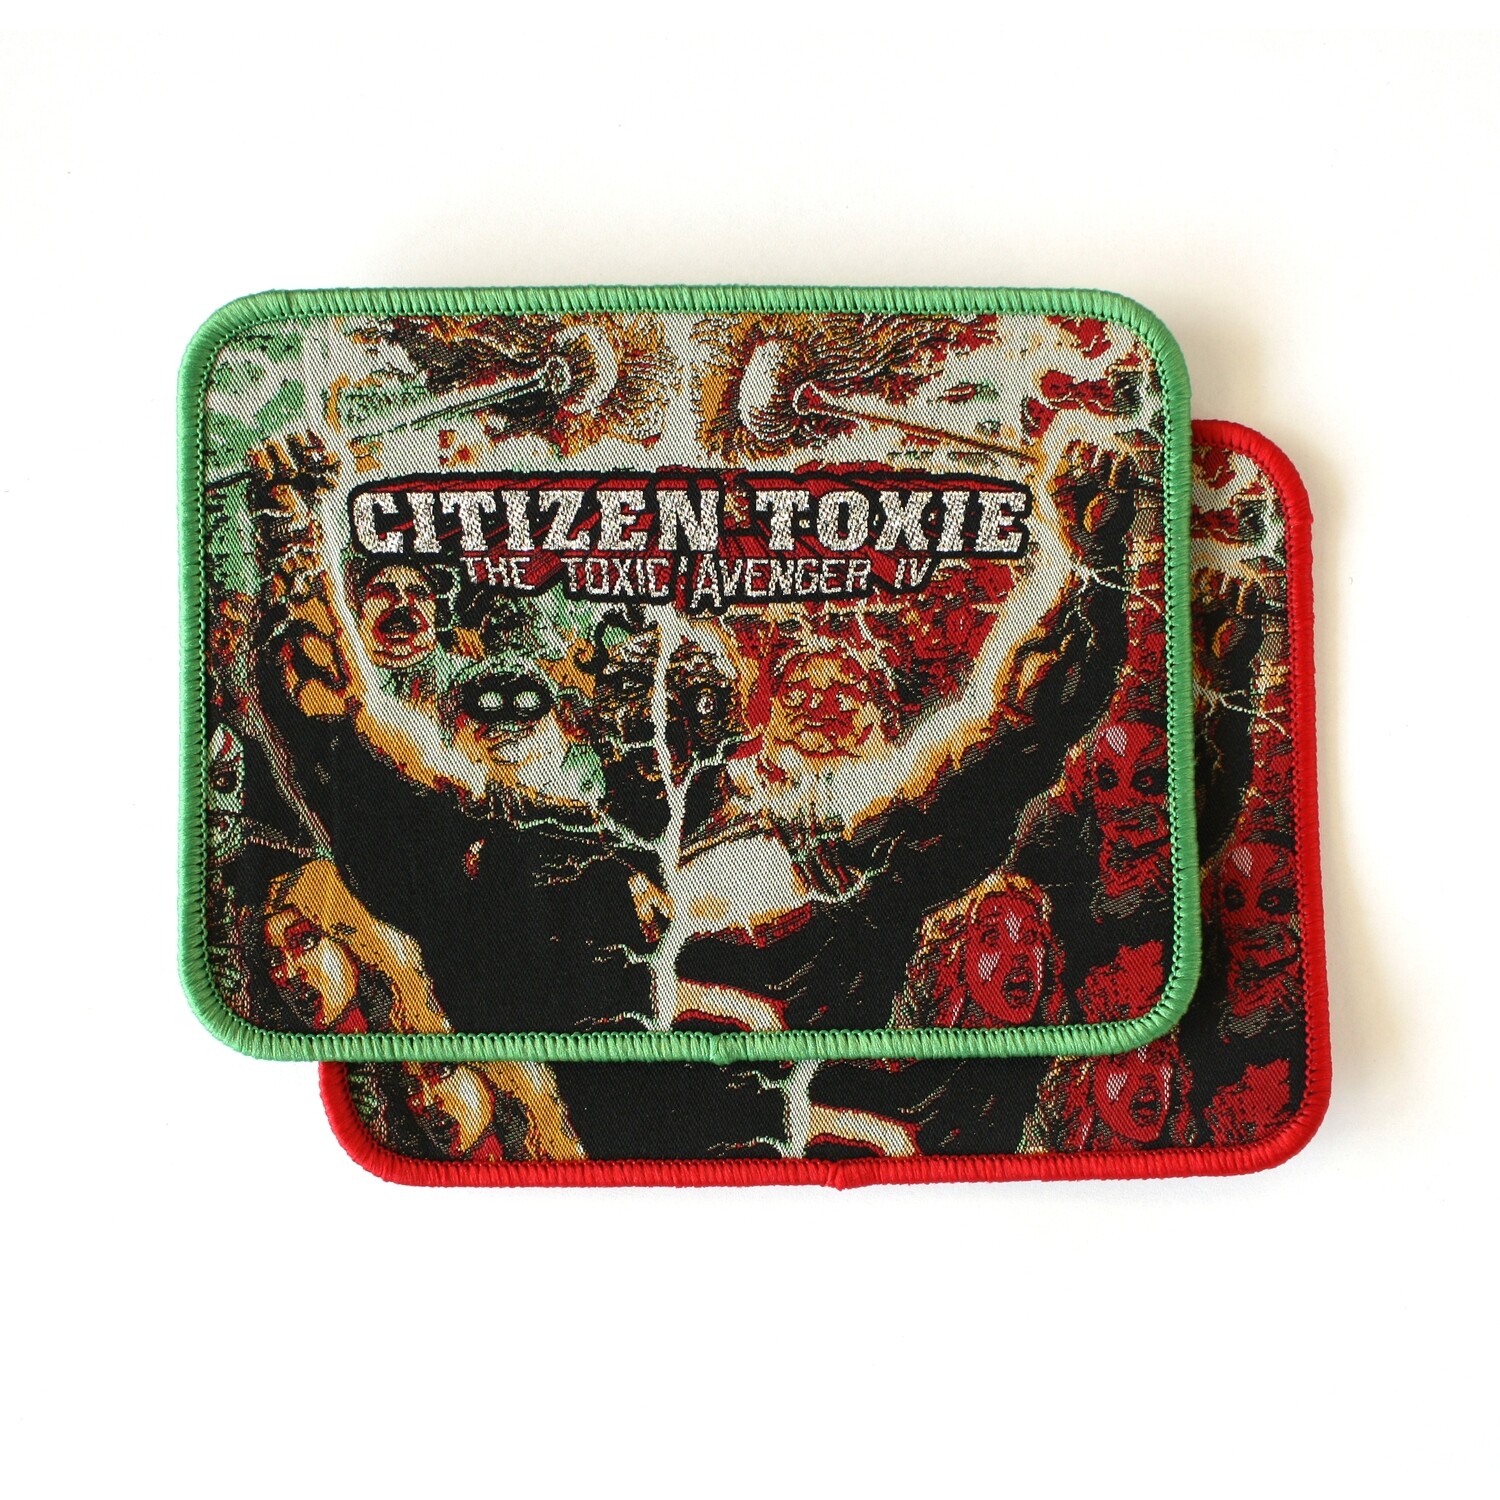 The Toxic Avenger IV - Citizen Toxie, Border Color: Red